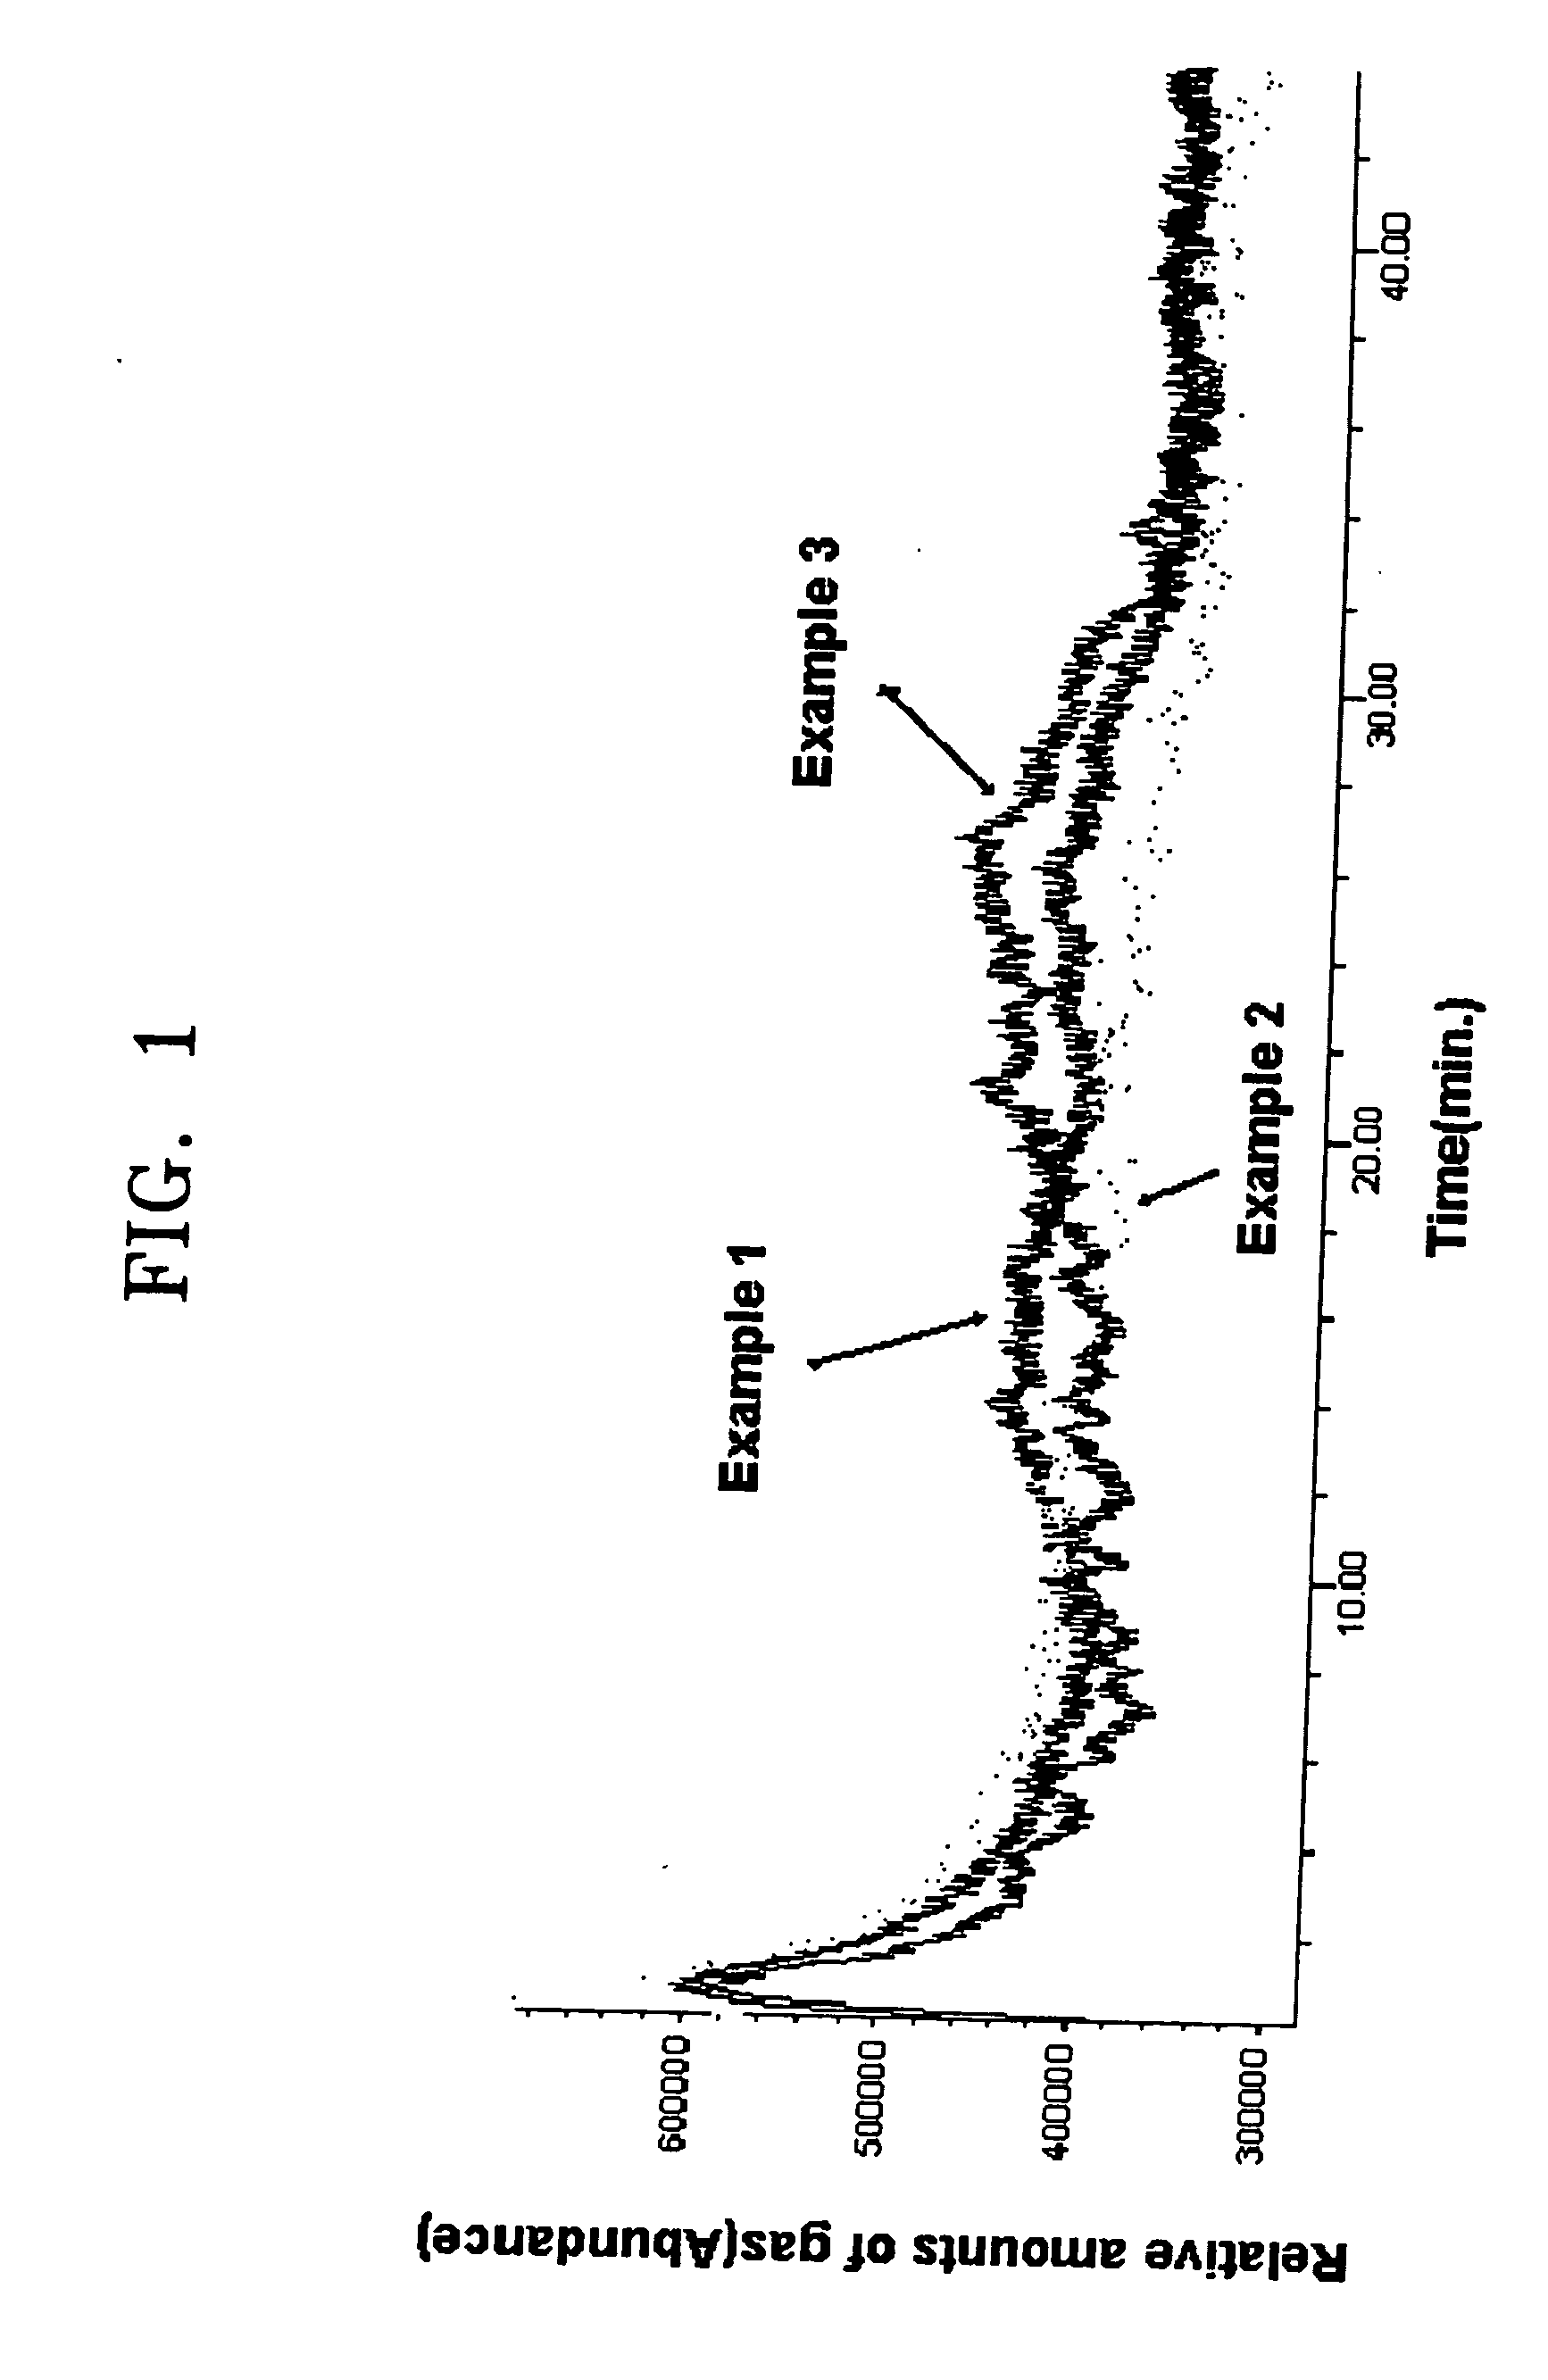 Cathode active material, method of preparing the same, and cathode and lithium battery applying the material